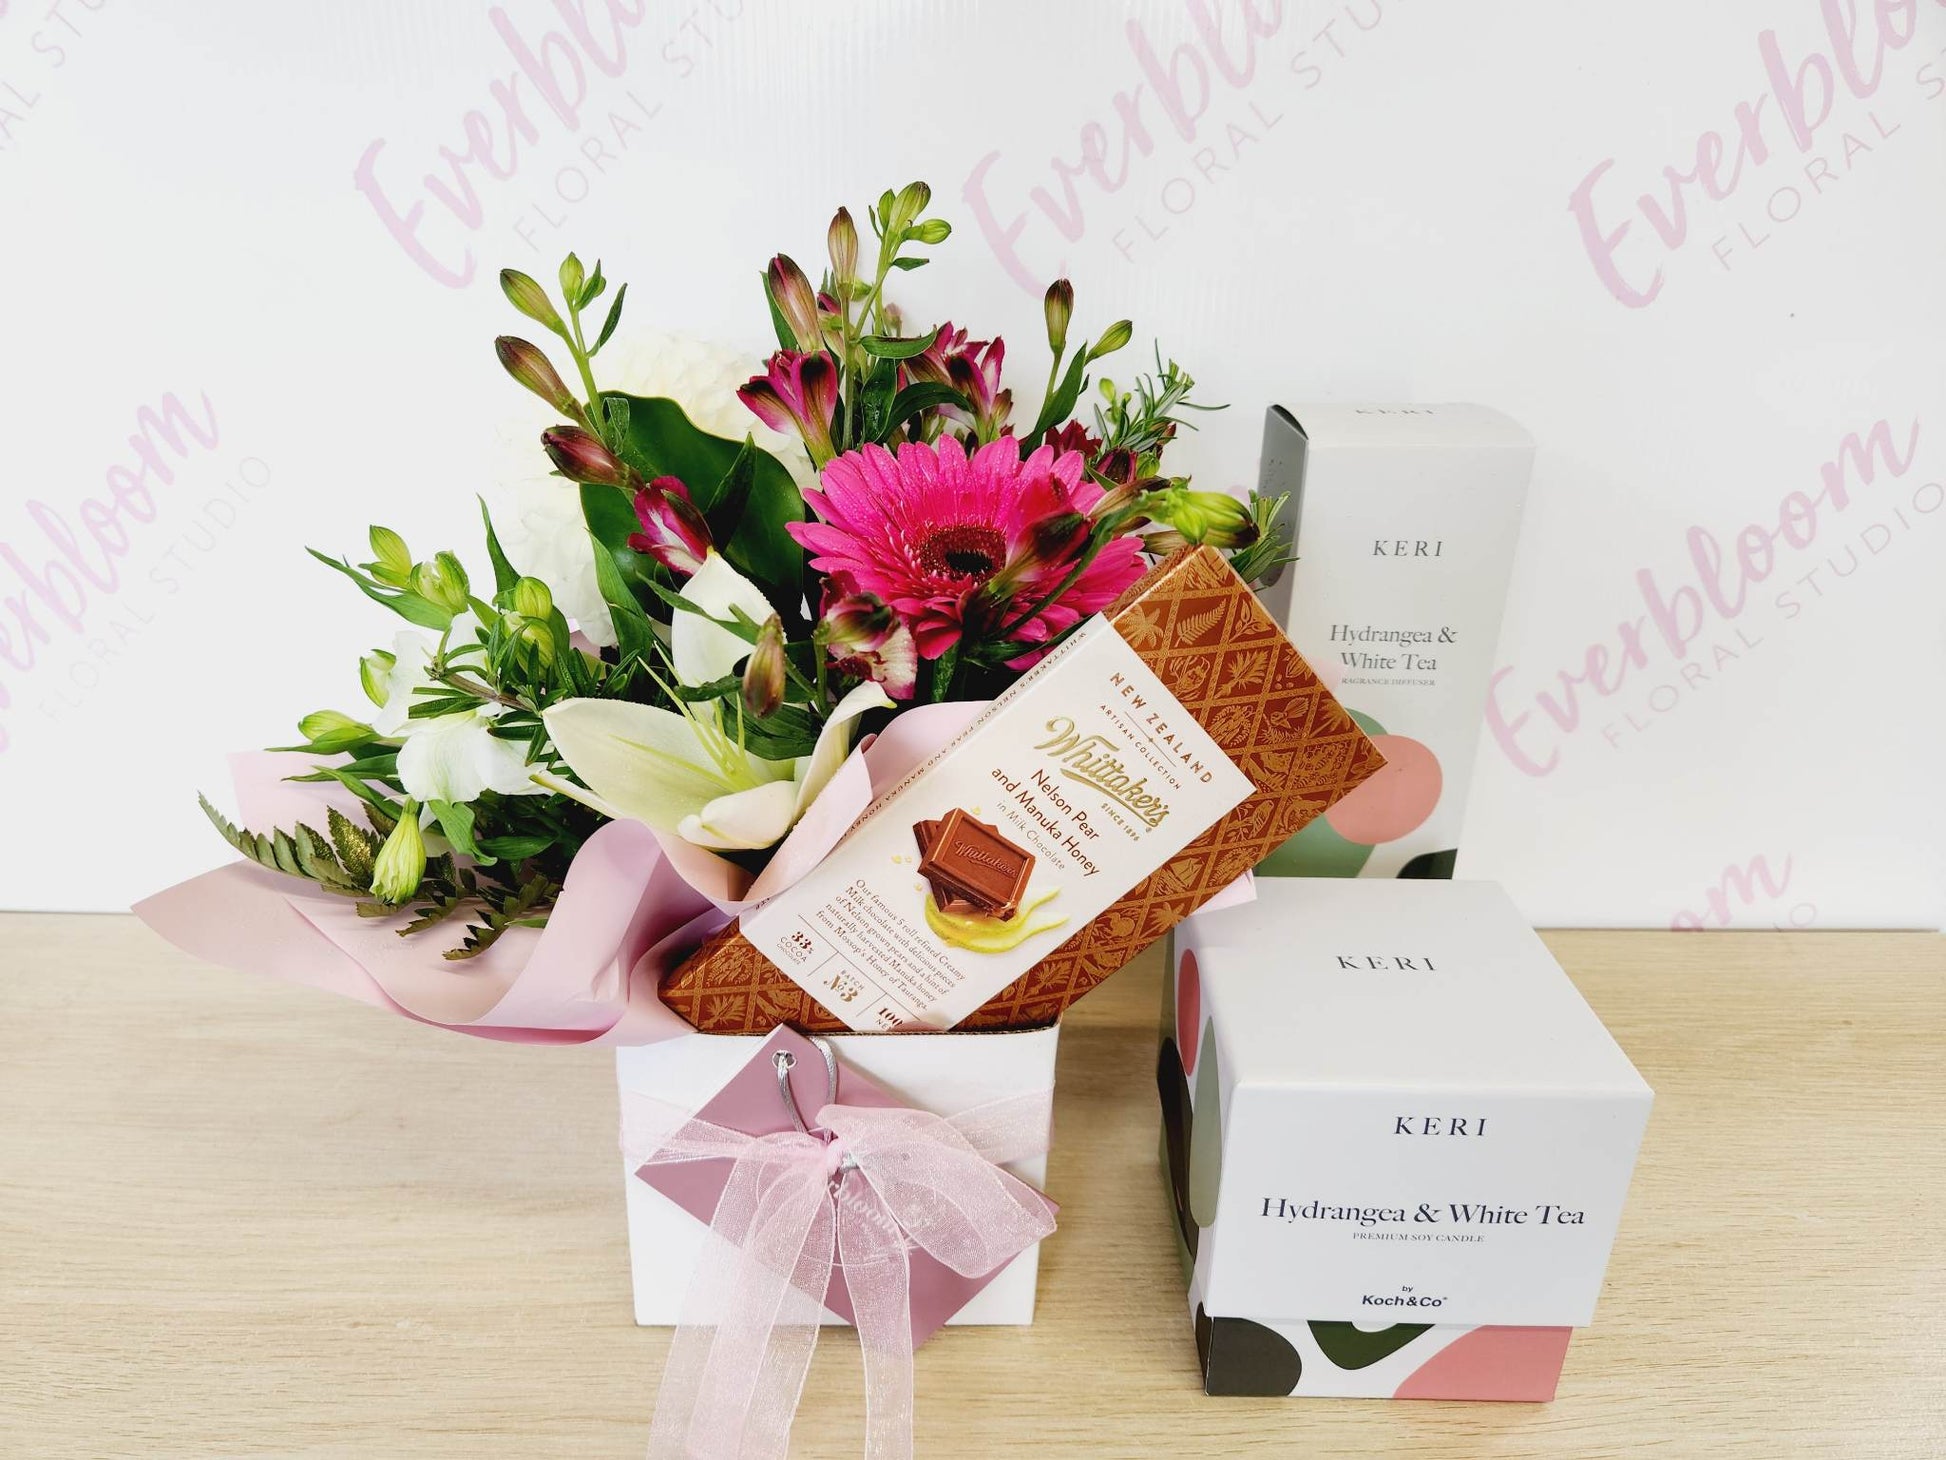 GIft box for her - Hampers and Gifts. Everbloom Floral Studio - Papamoa Florist